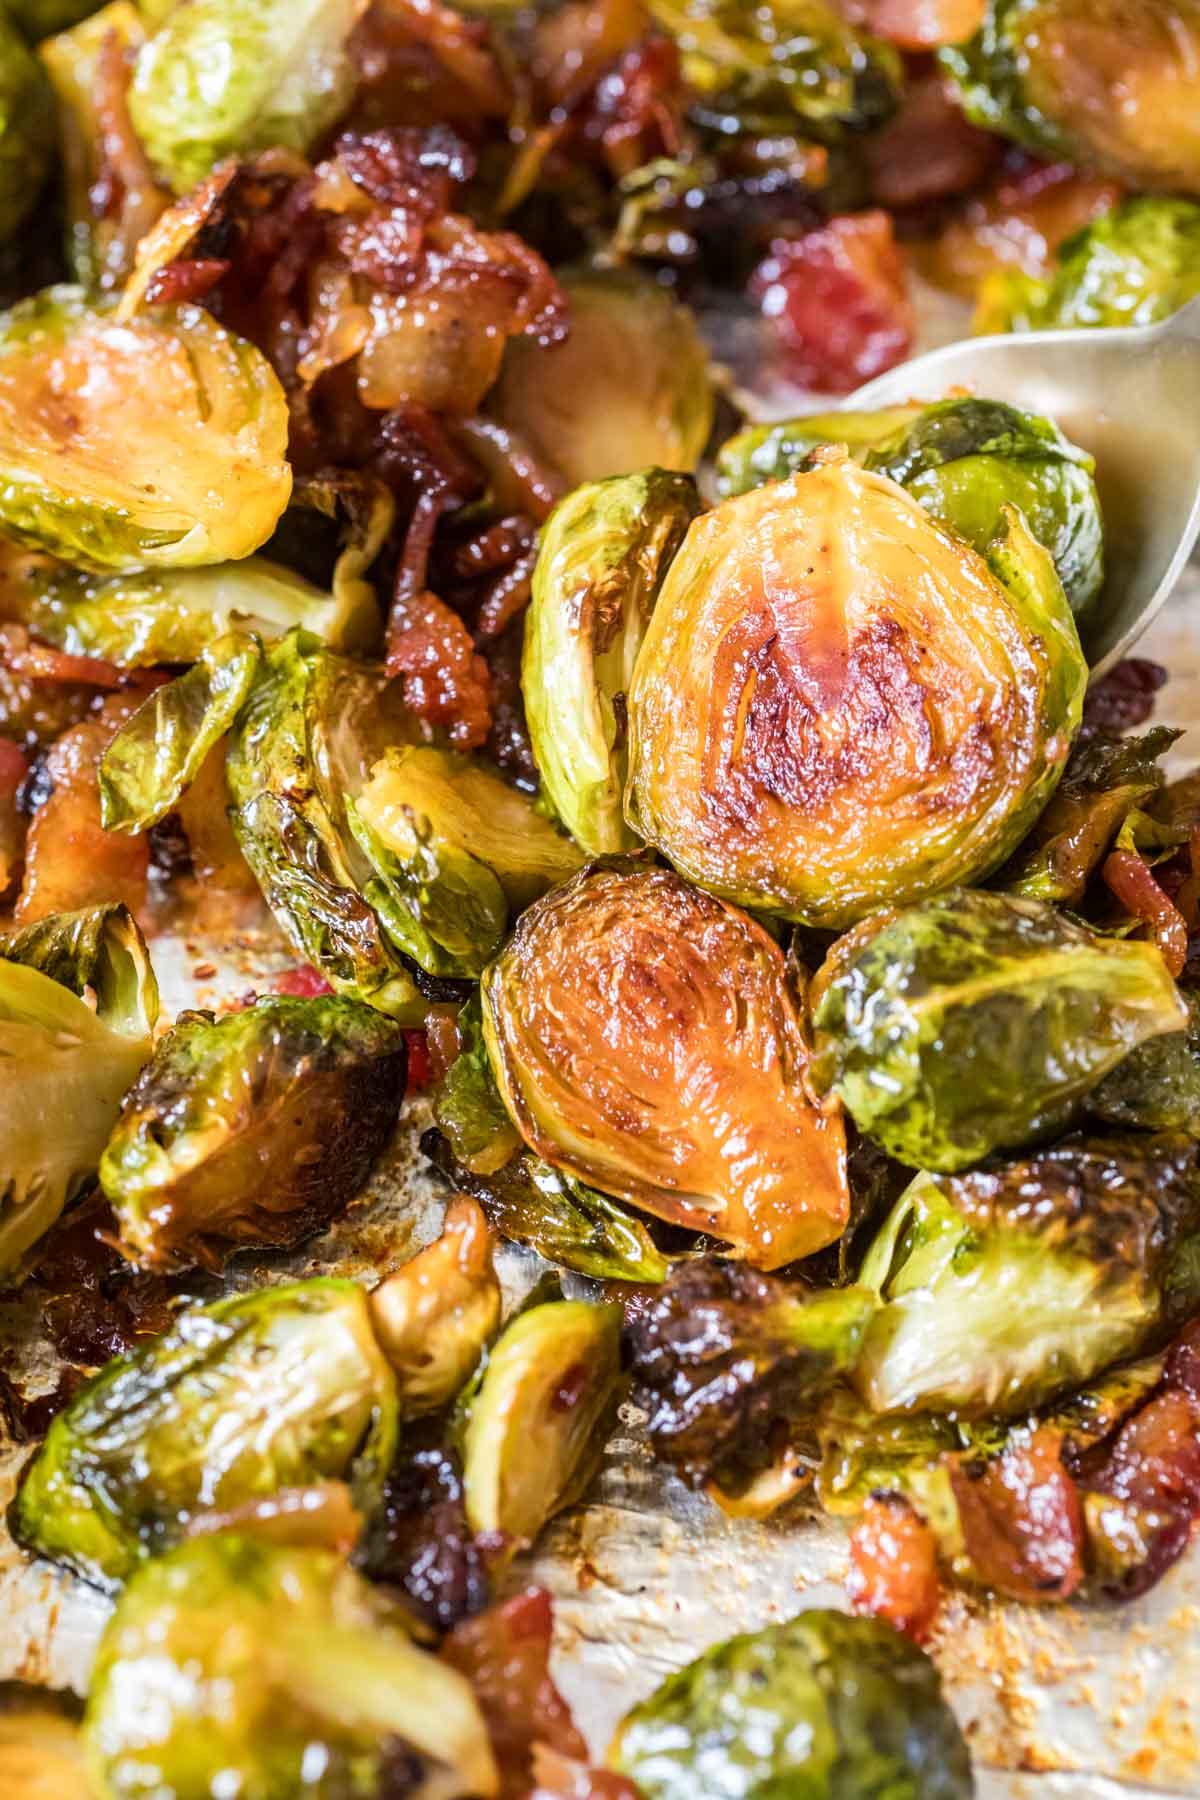 Crispy roasted brussels sprouts made with bacon and maple syrup.